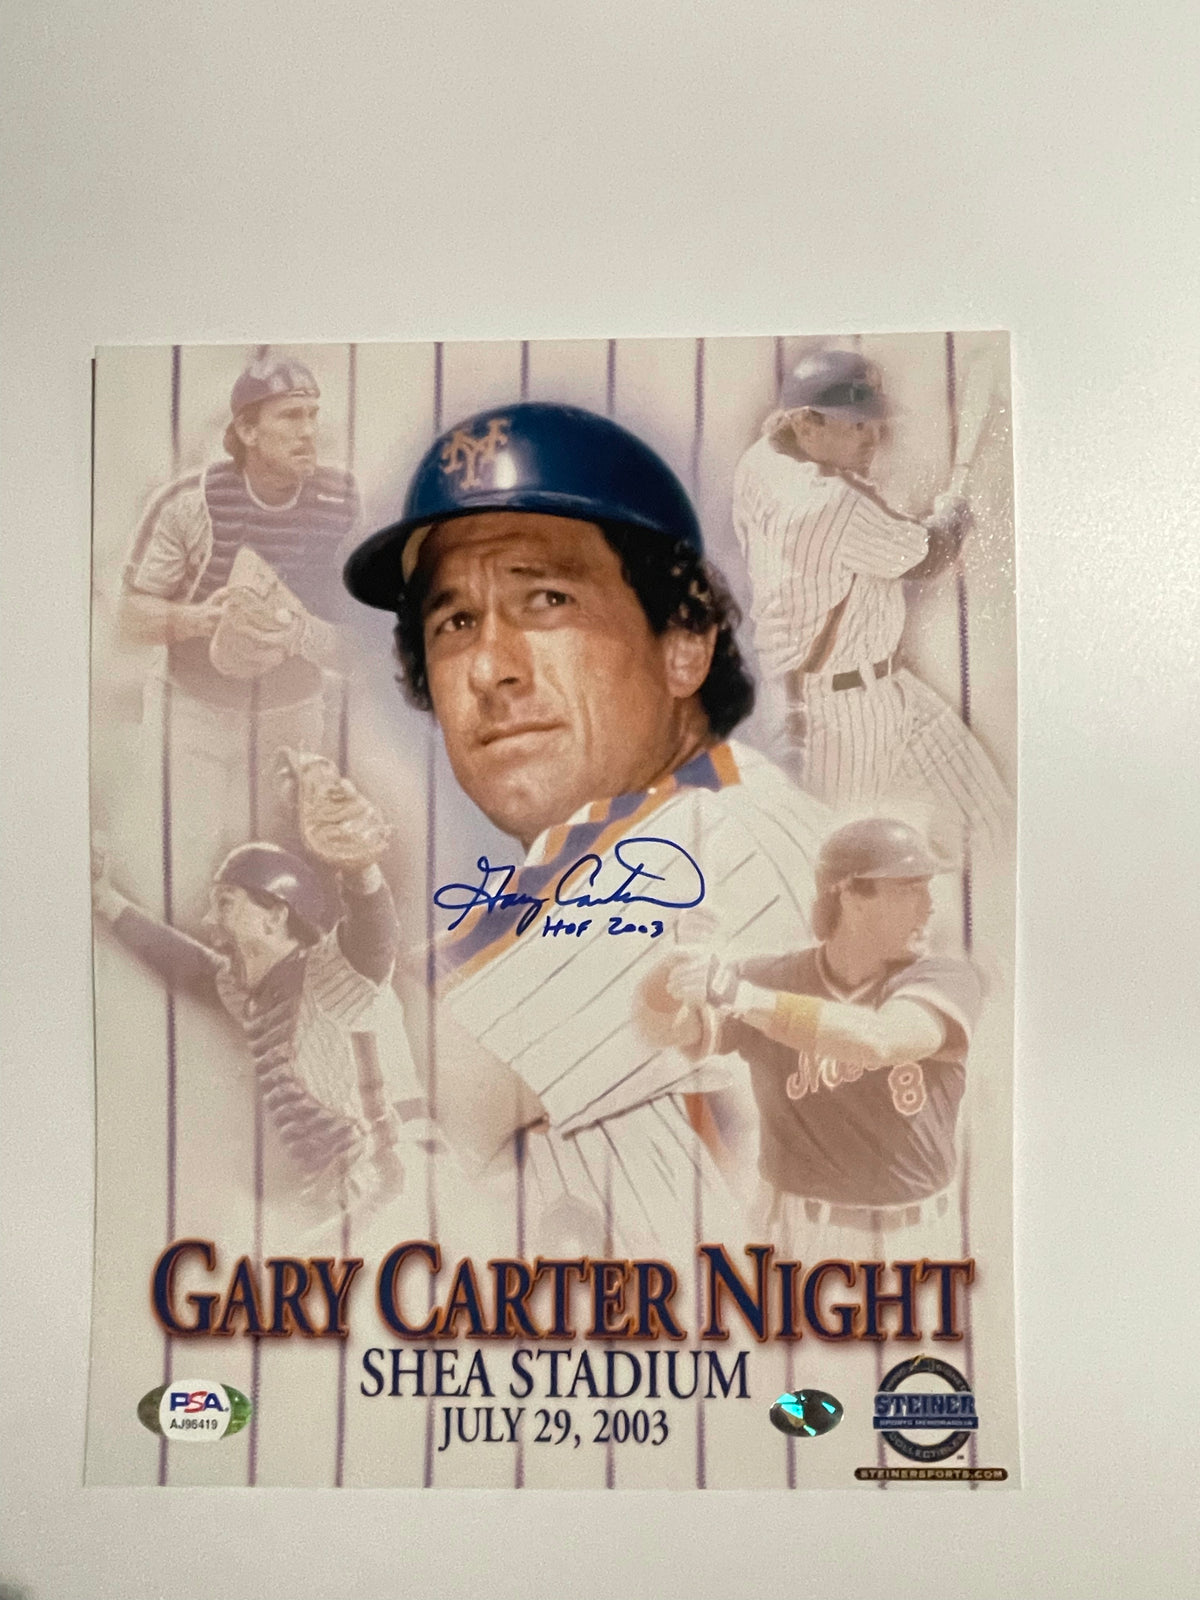 Gary Carter 1986 World Series New York Mets 8 x 10 Framed Baseball Photo  with Engraved Autograph